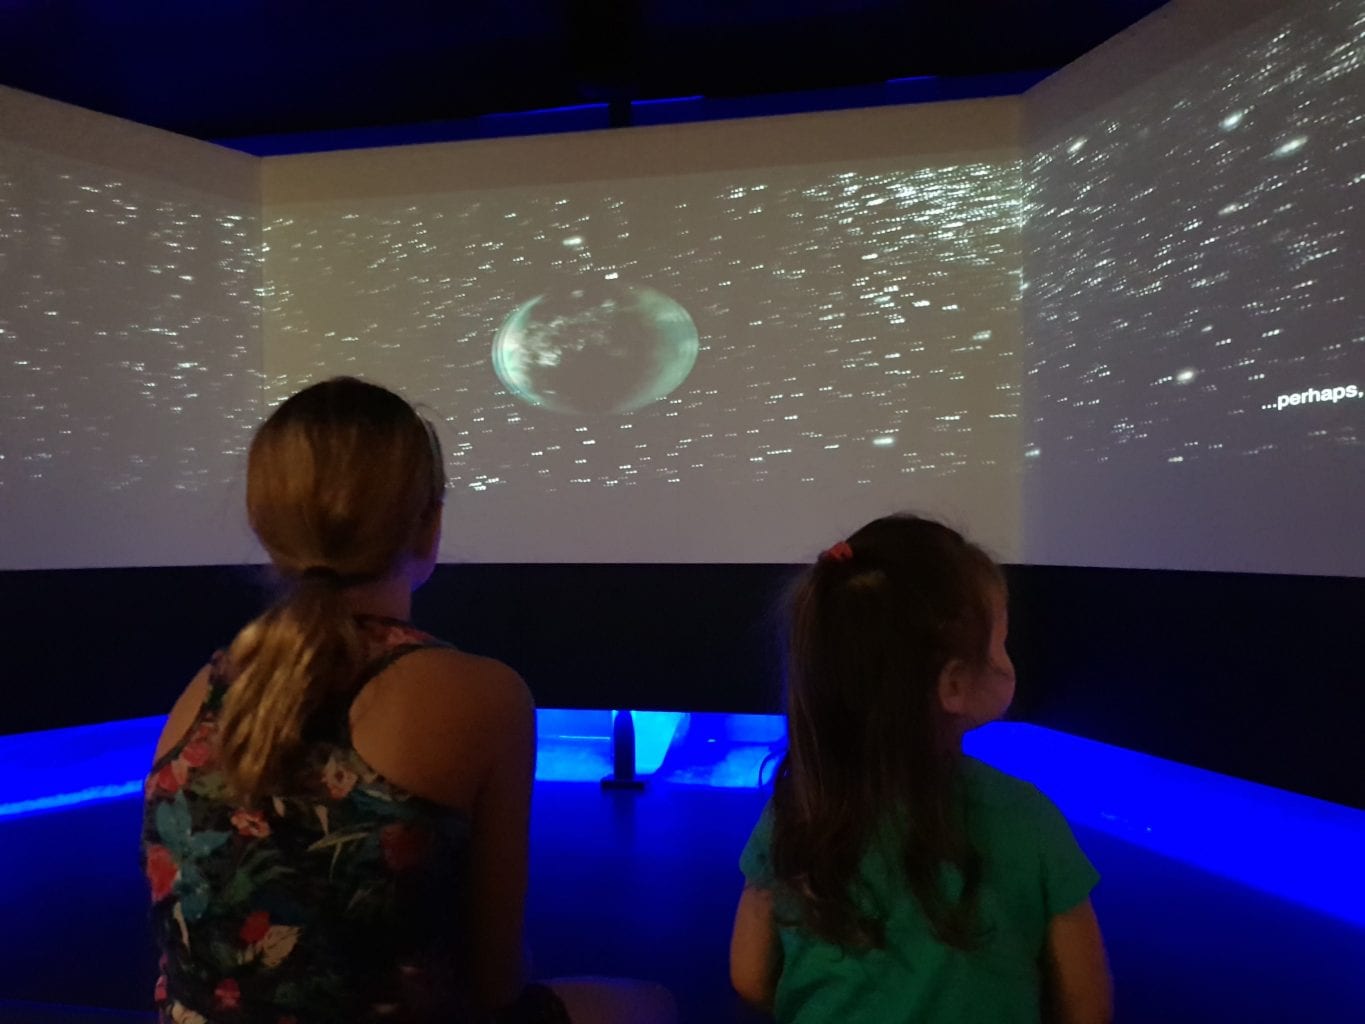 Amazing hands-on learning a the Astronomy Center at the Royal Observatory Greenwich